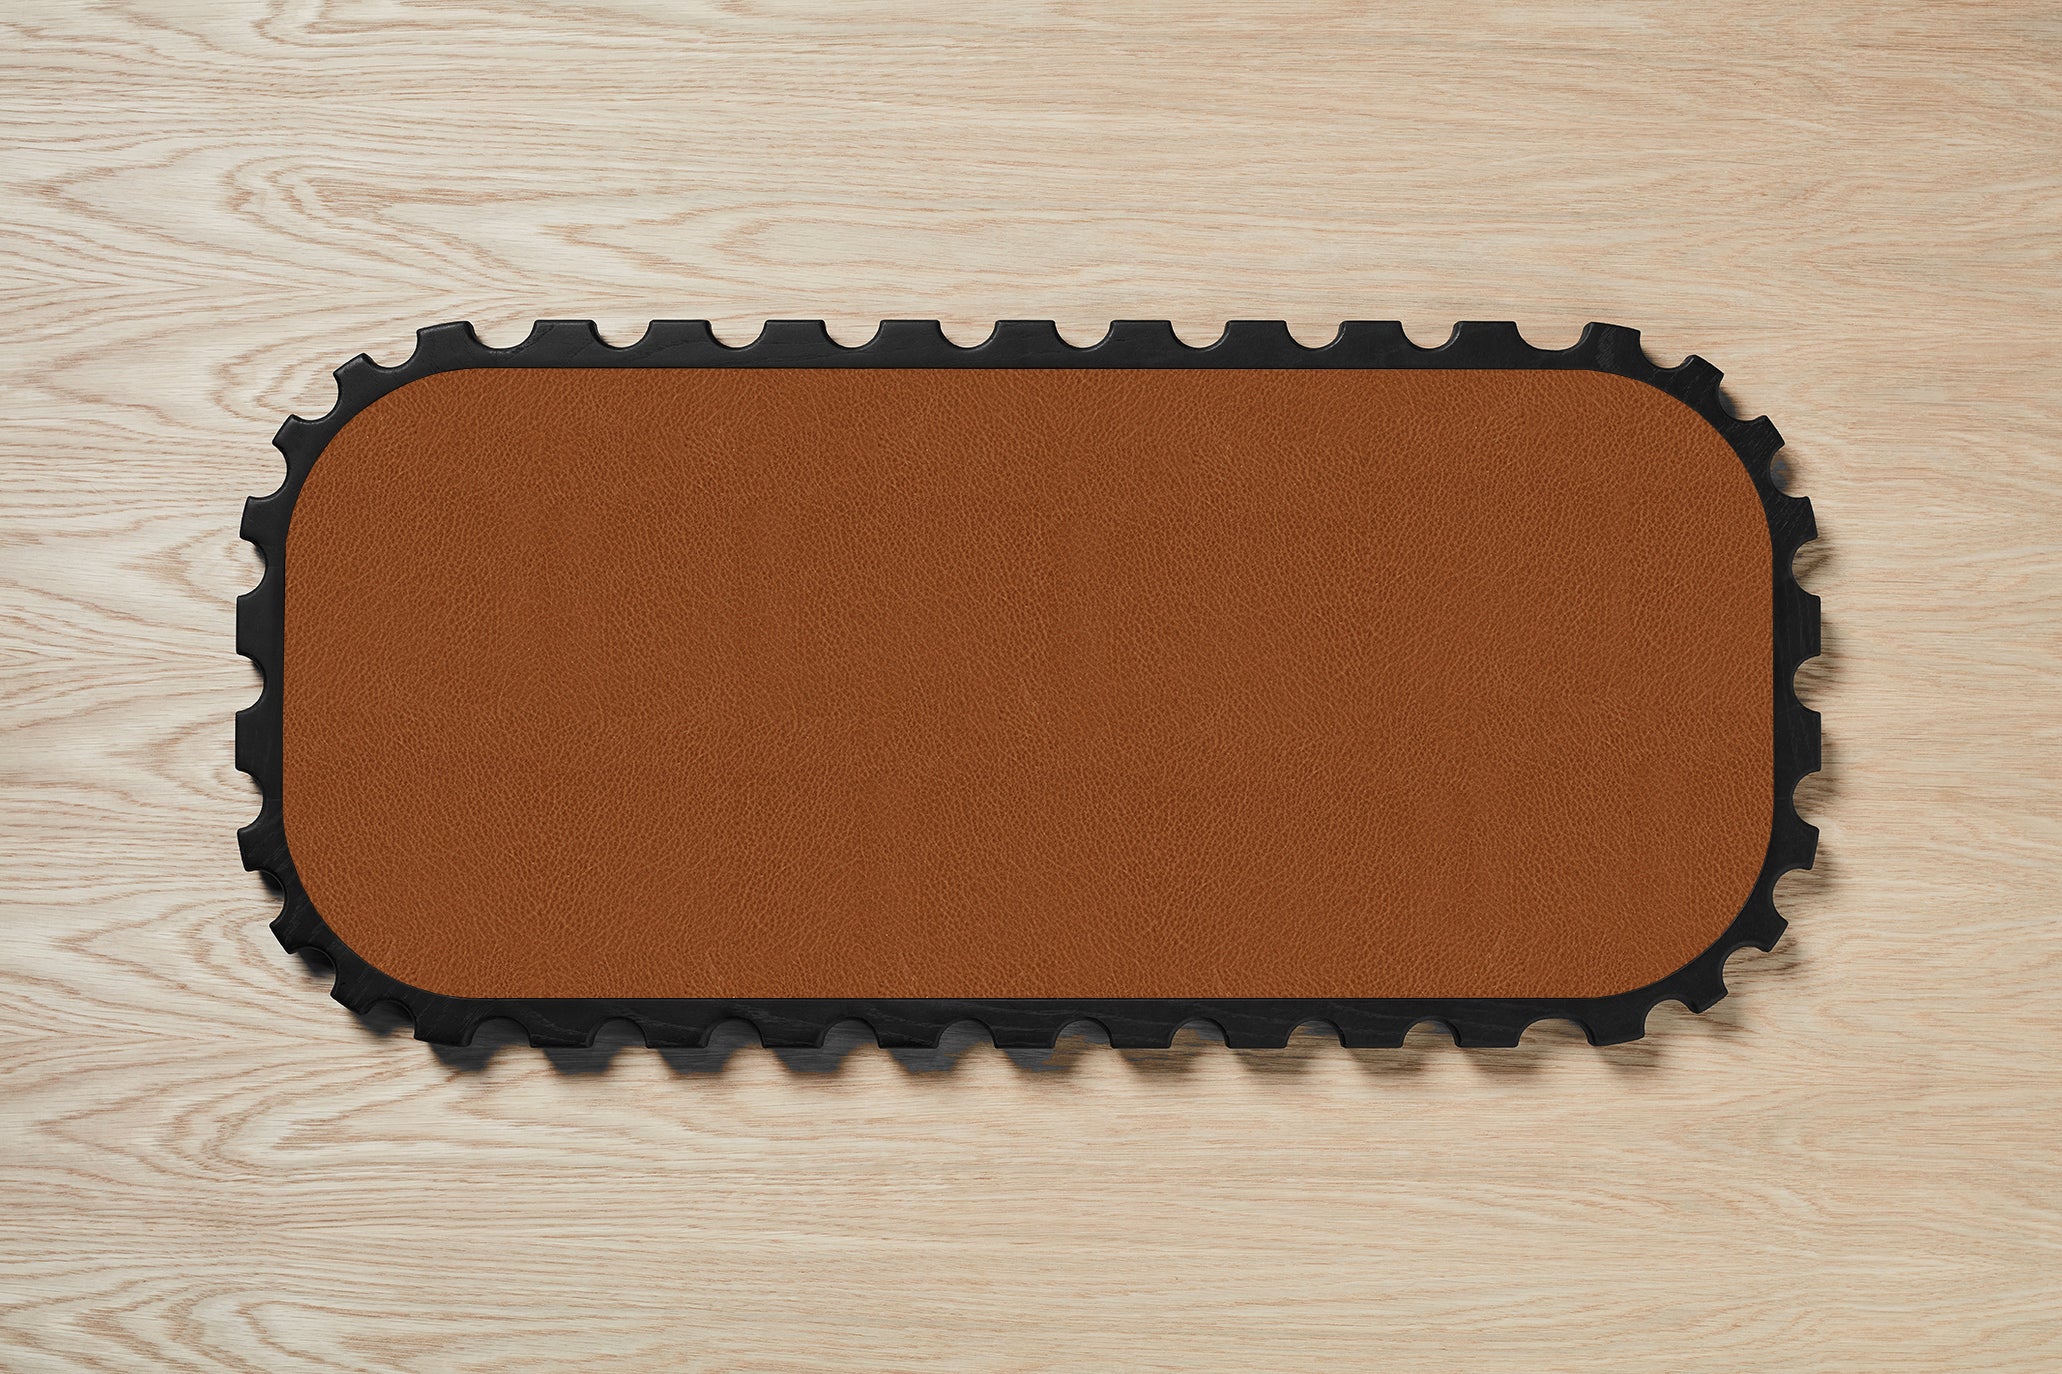 Flow Scalloped Tan Faux Leather Tray